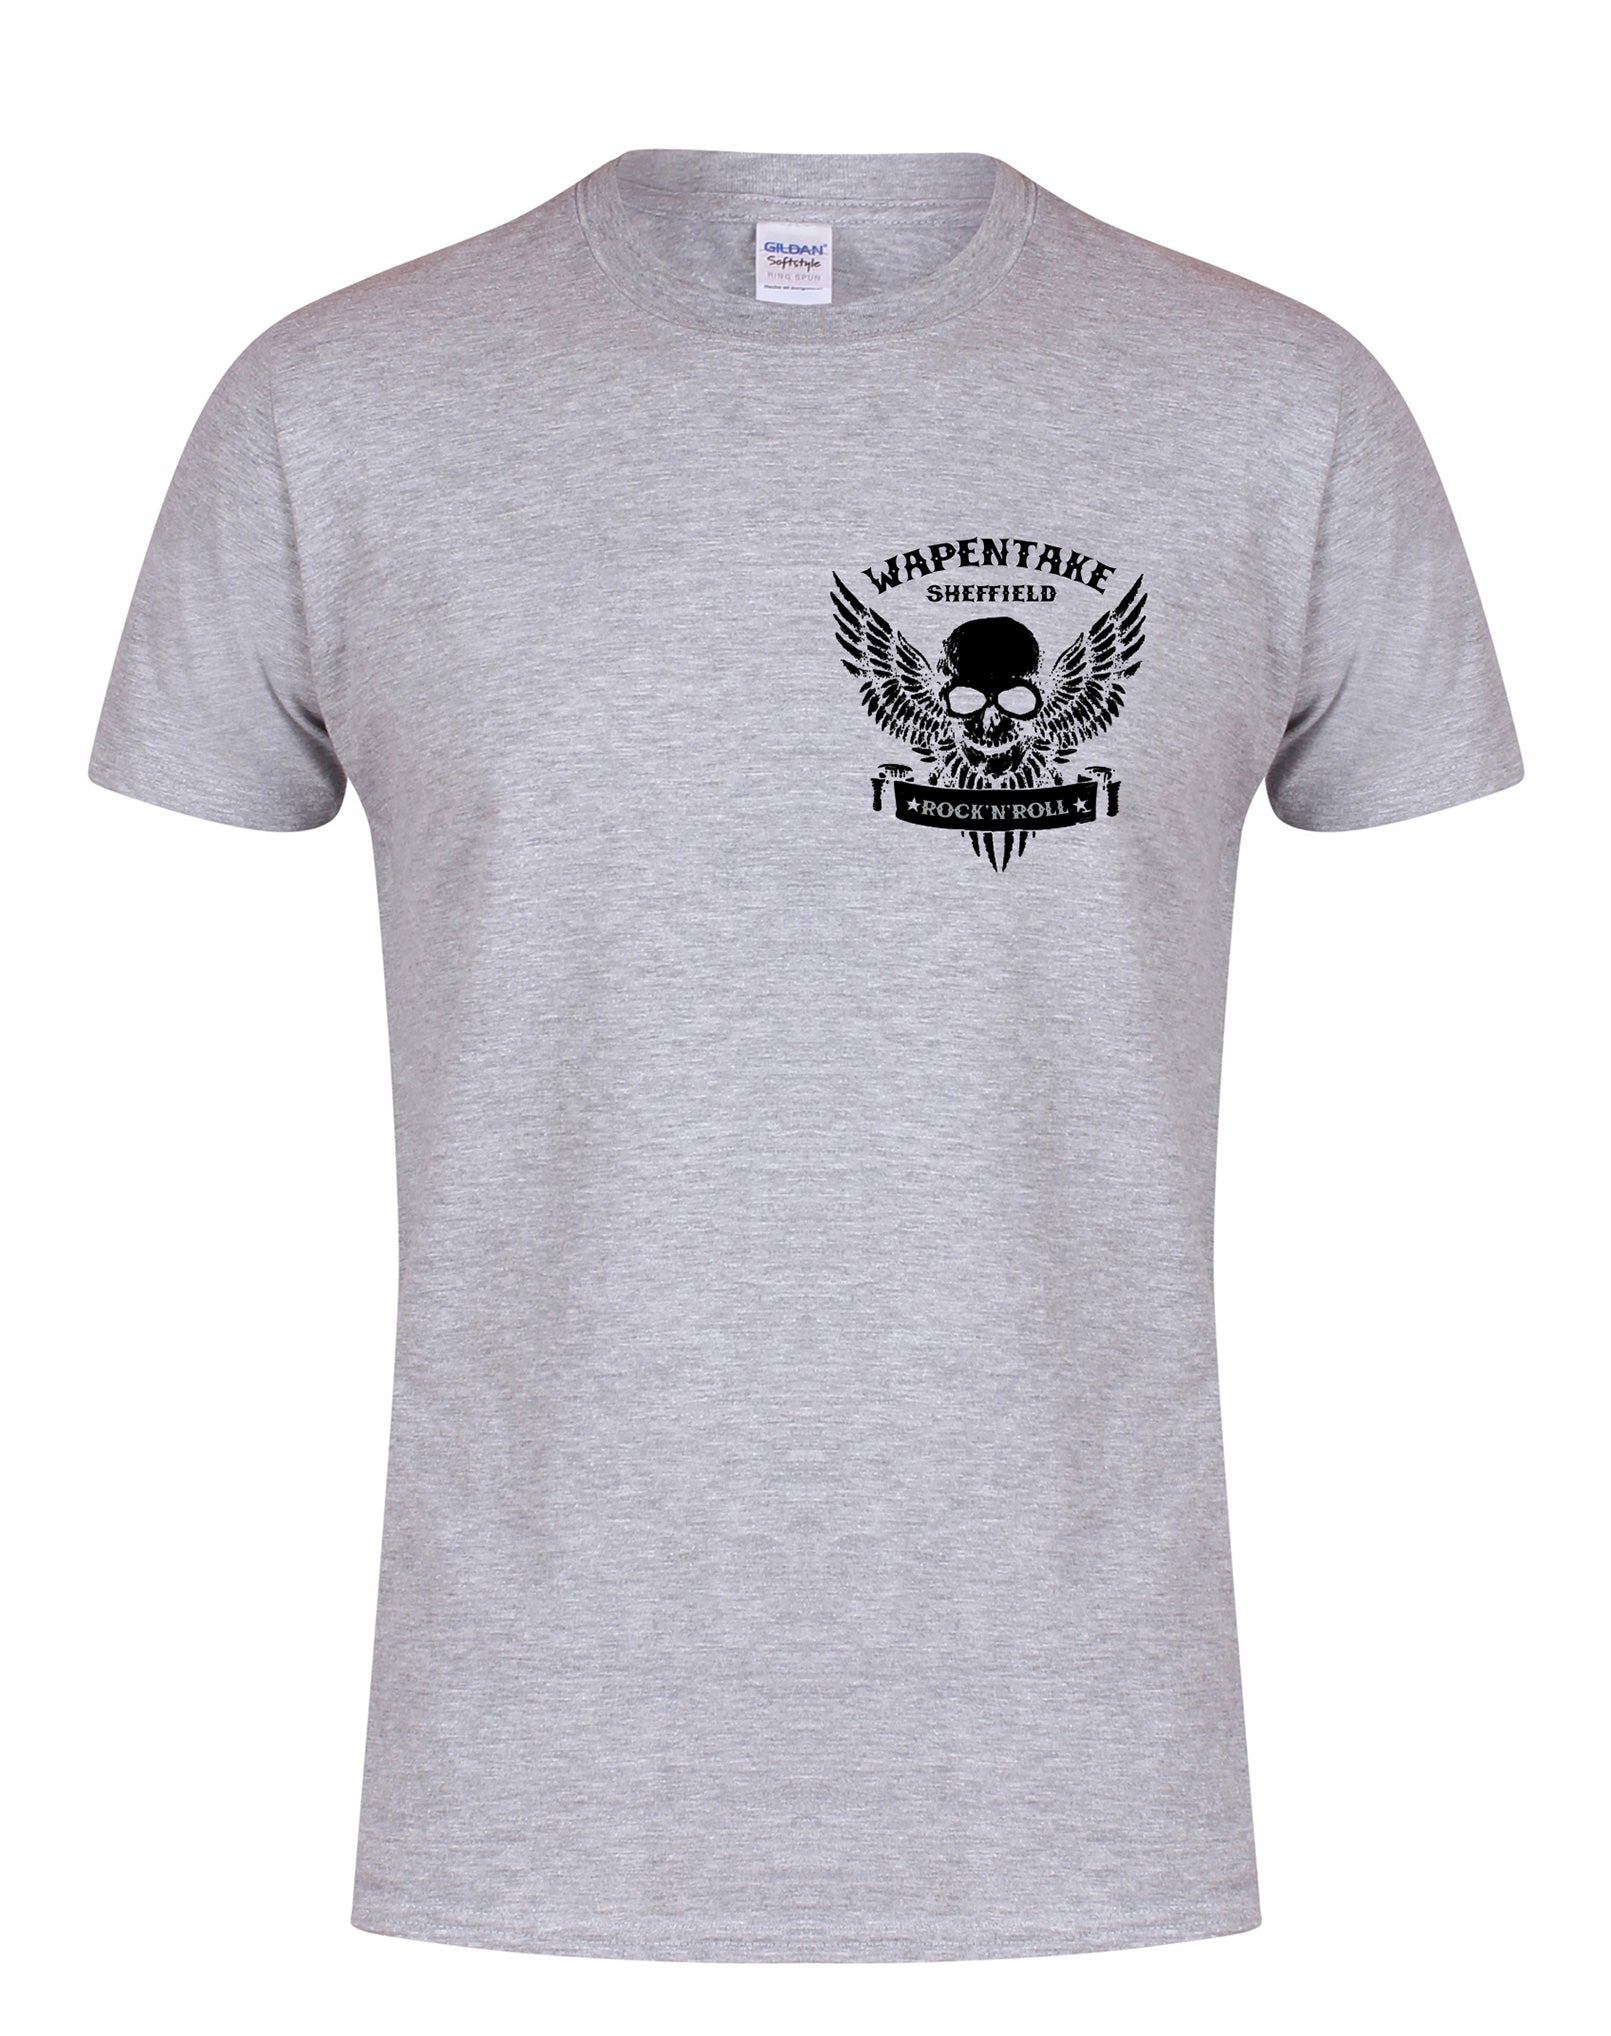 Wapentake small skull/wings unisex fit T-shirt - various colours - Dirty Stop Outs